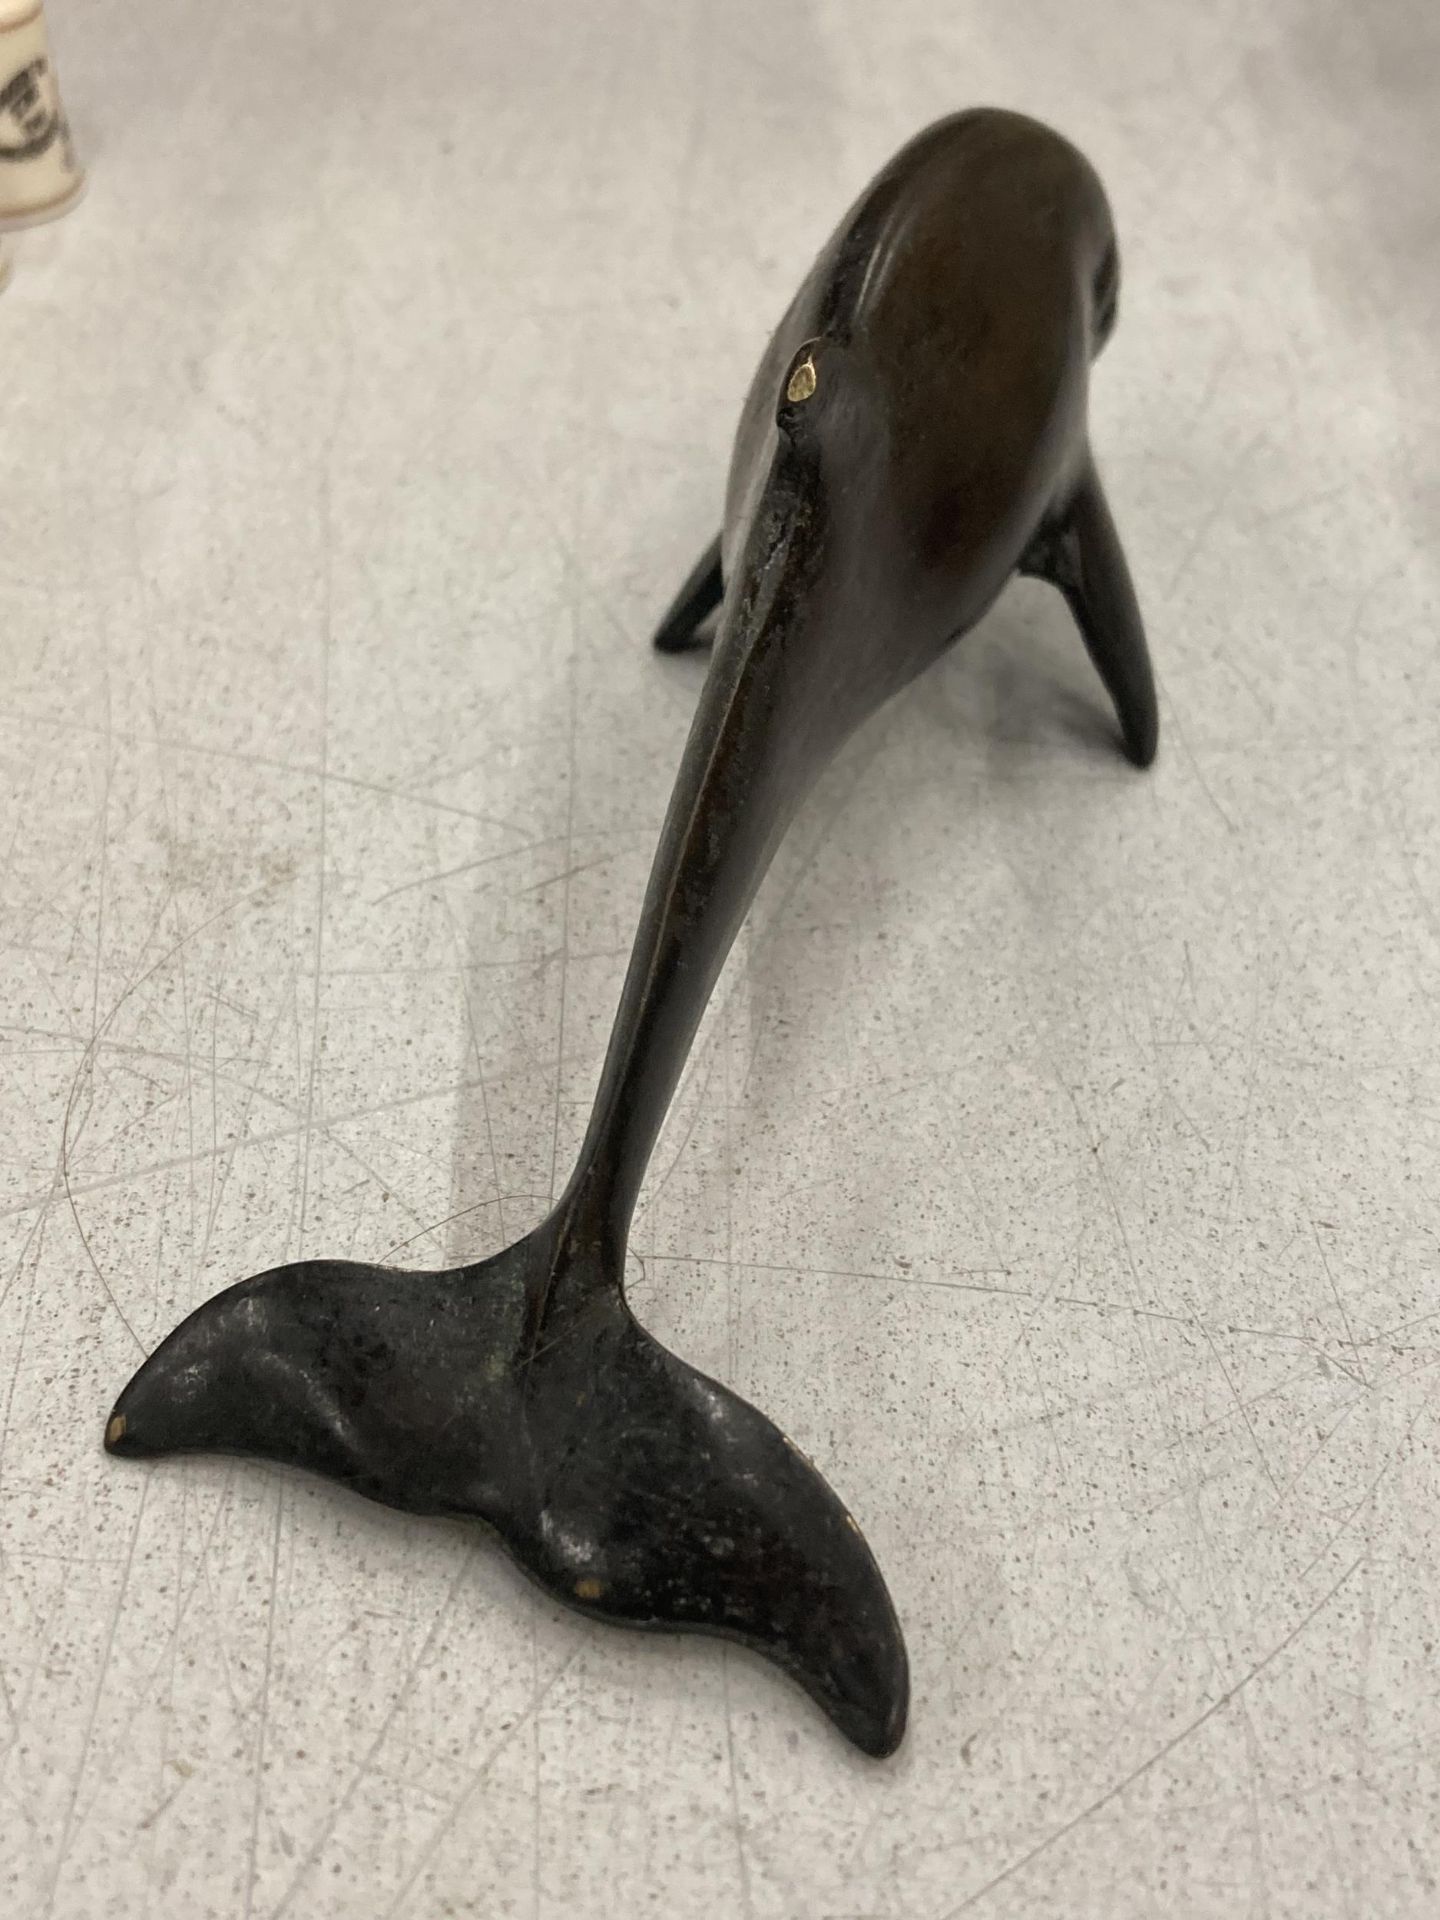 A SMALL BRONZE DOLPHIN FIGURE - Image 3 of 3